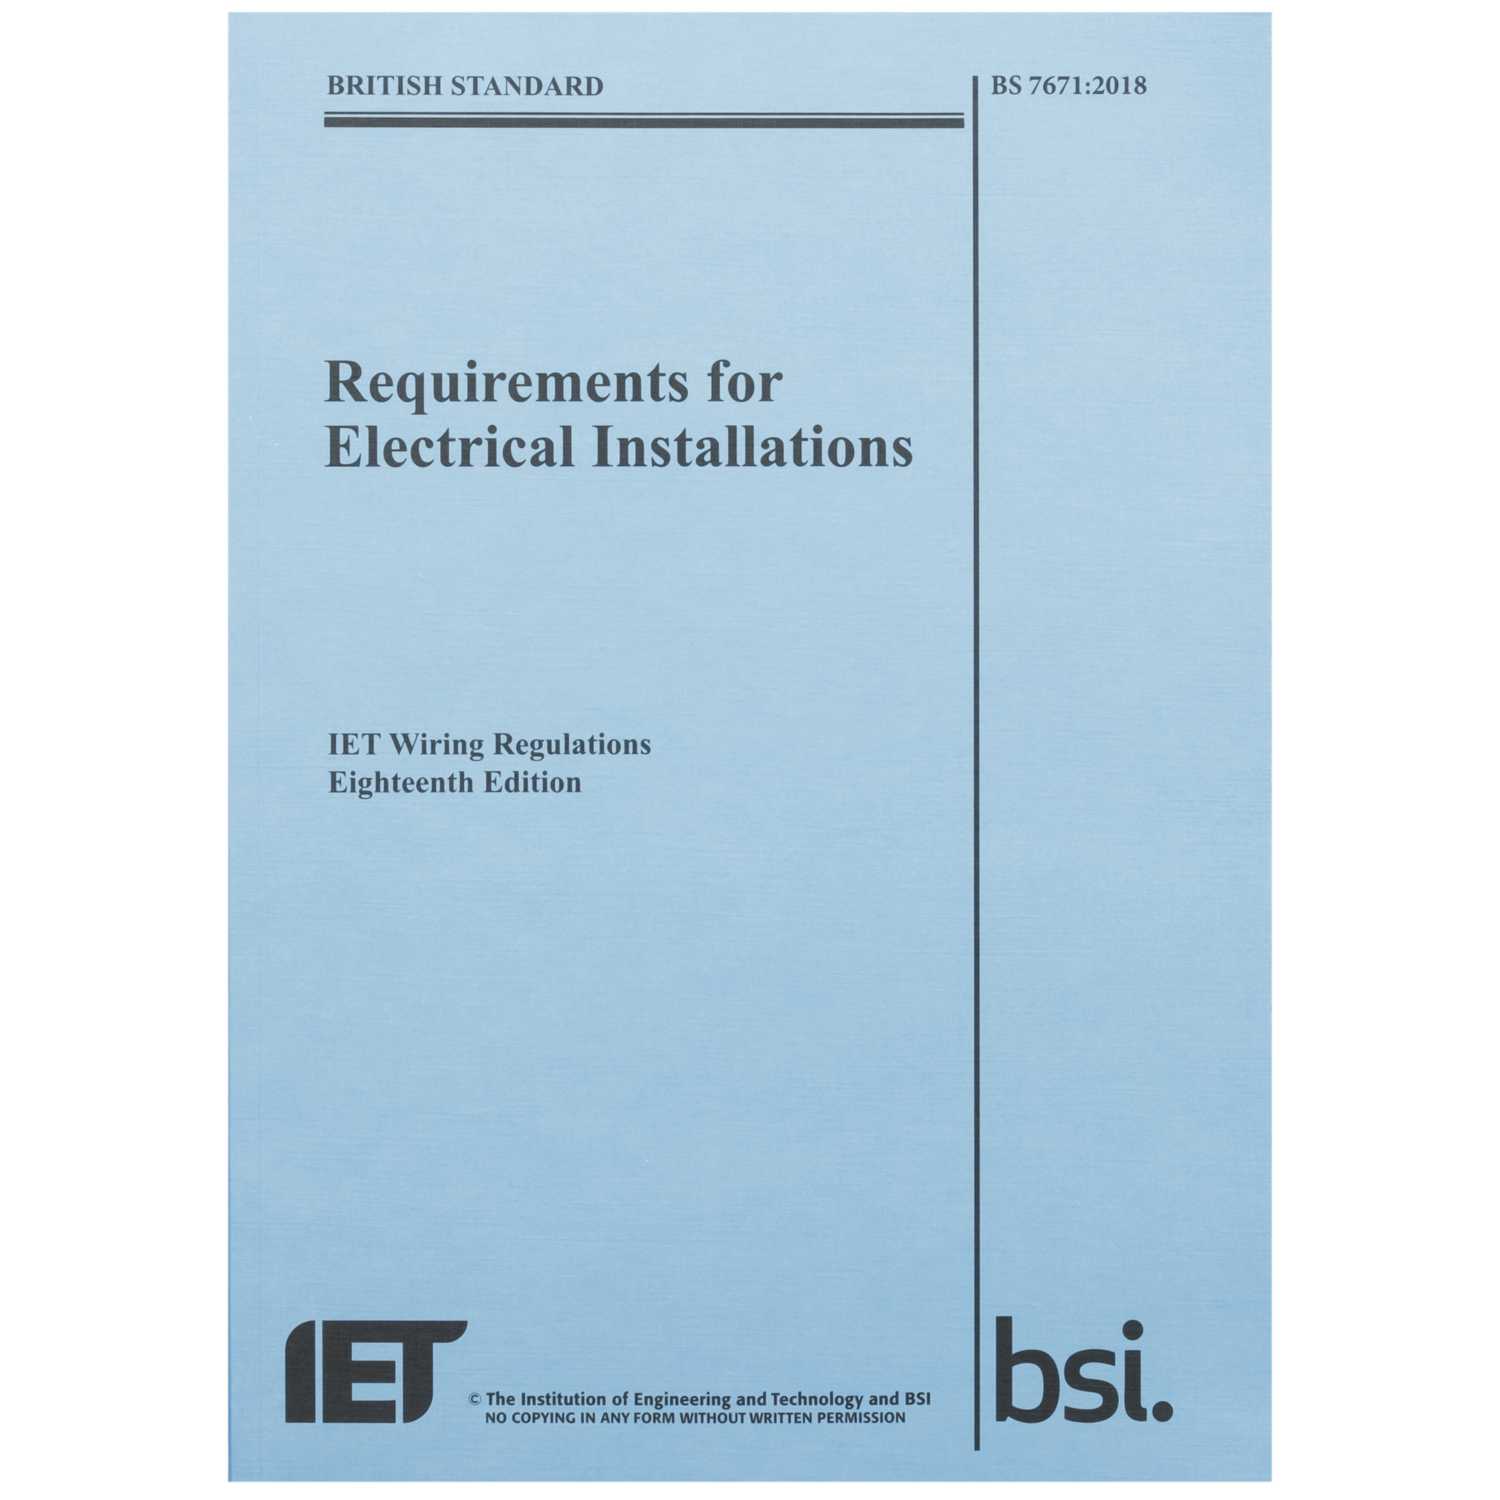 iet wiring regulations 18th edition book